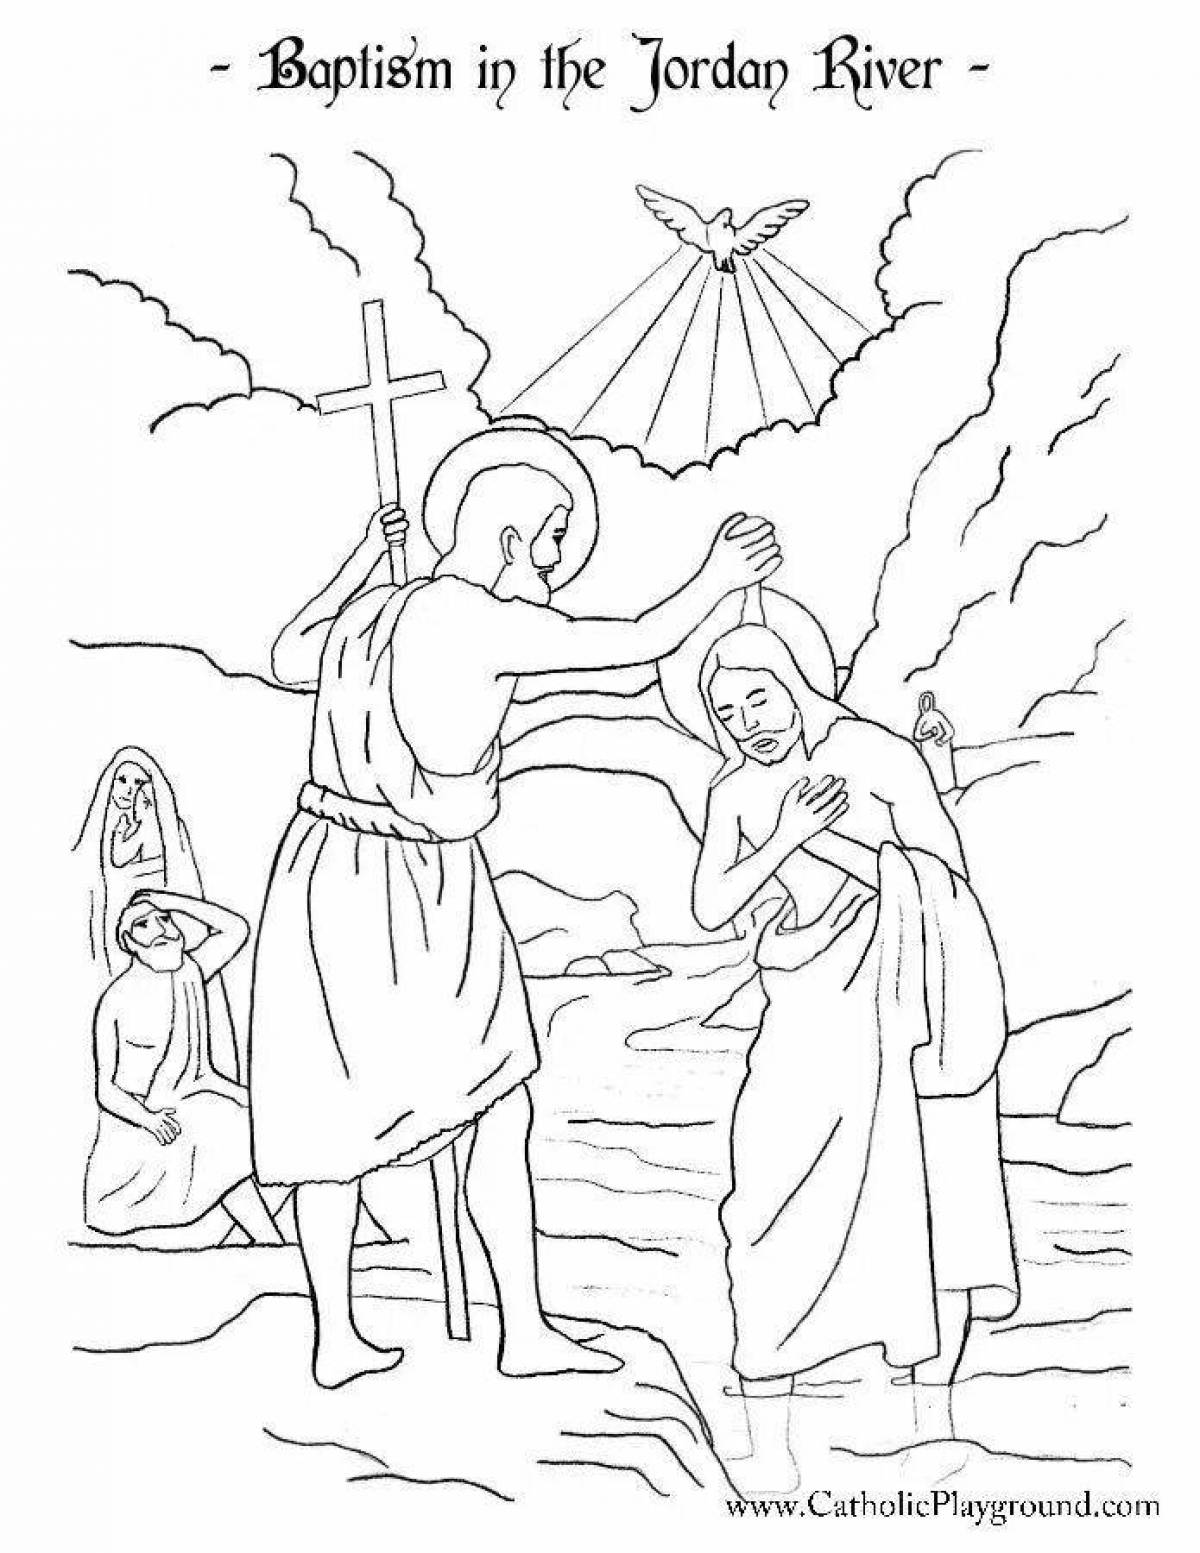 Divine baptism coloring book for orthodox children